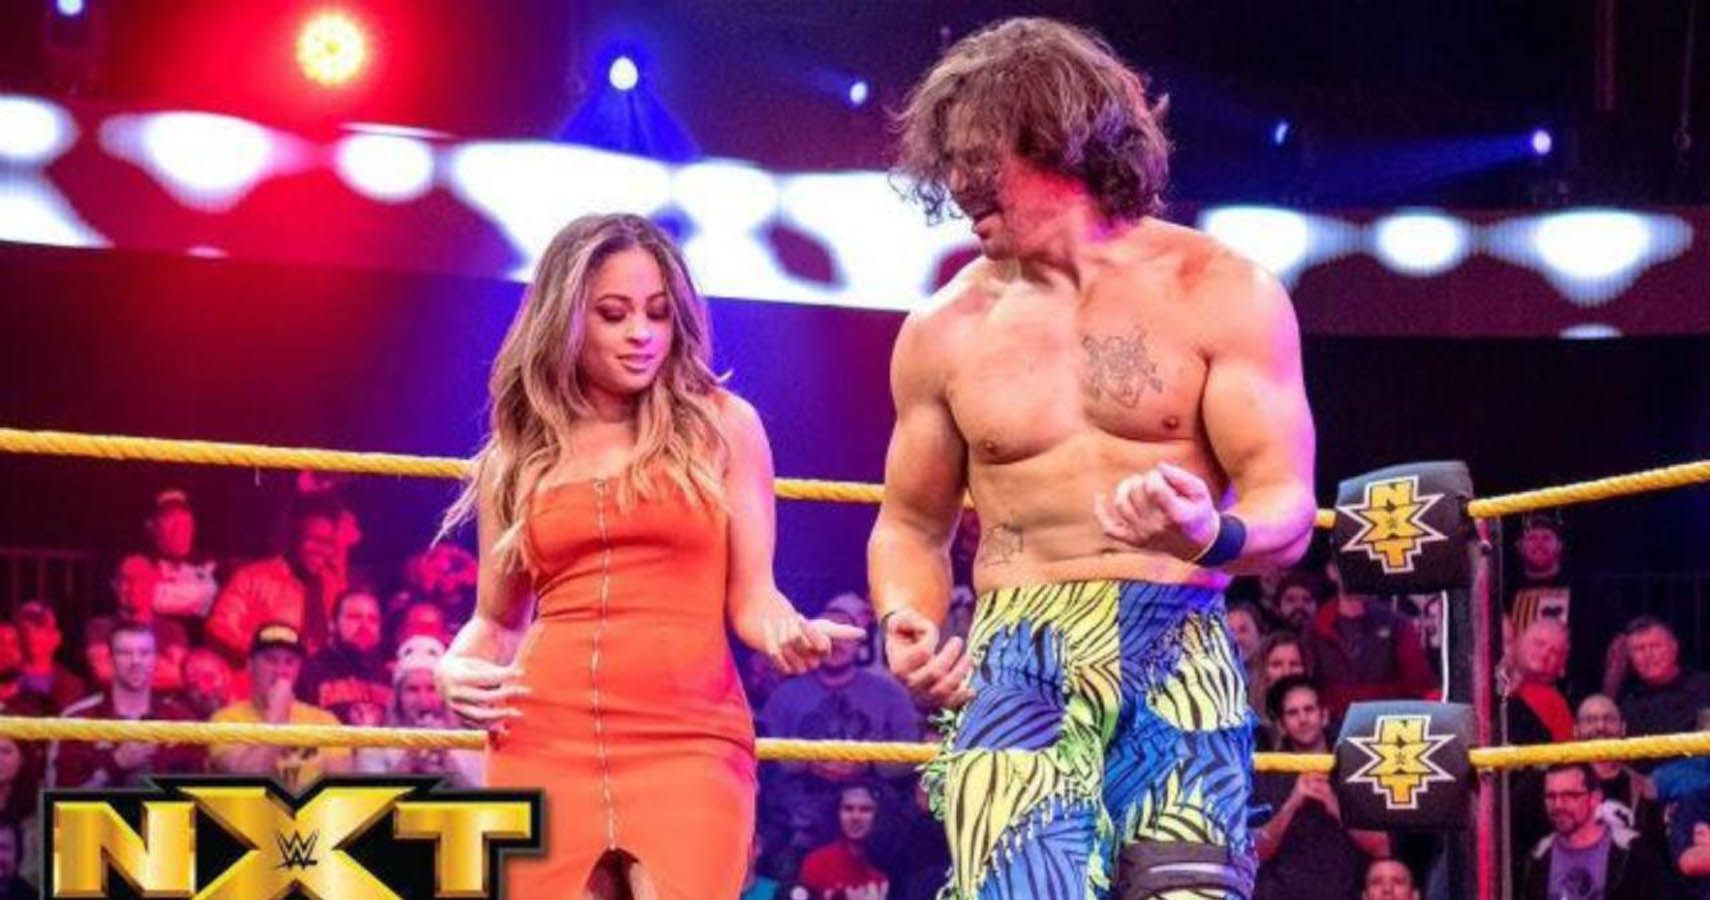 10 NXT Stars Who Need To Stay In The Developmental Brand